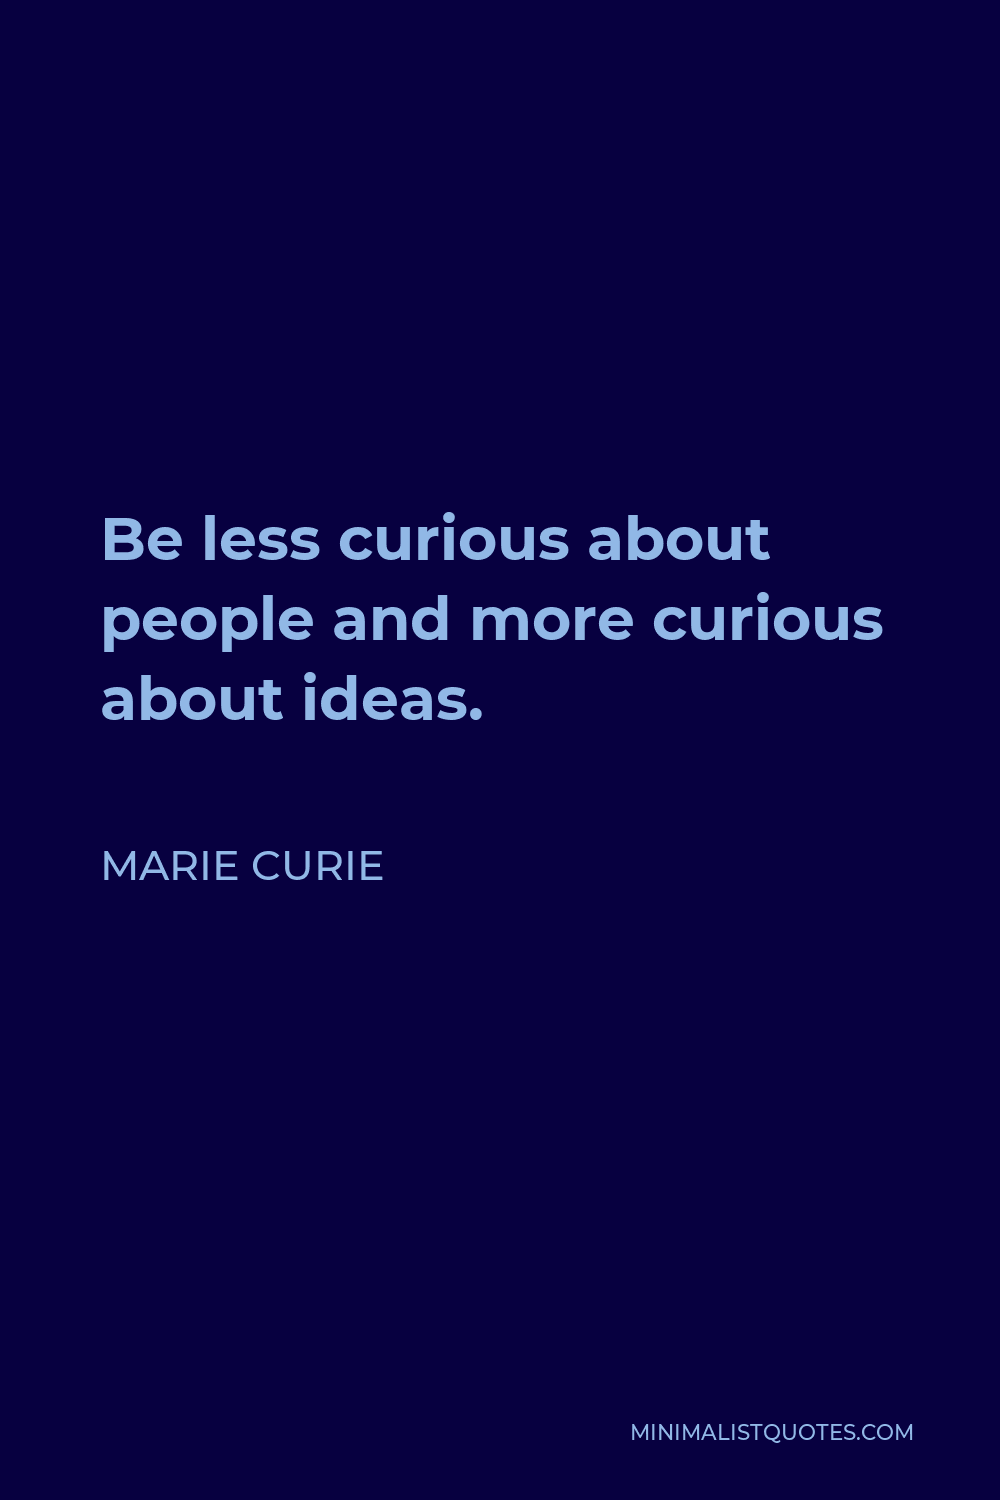 Marie Curie Quote - Be less curious about people and more curious about ideas.